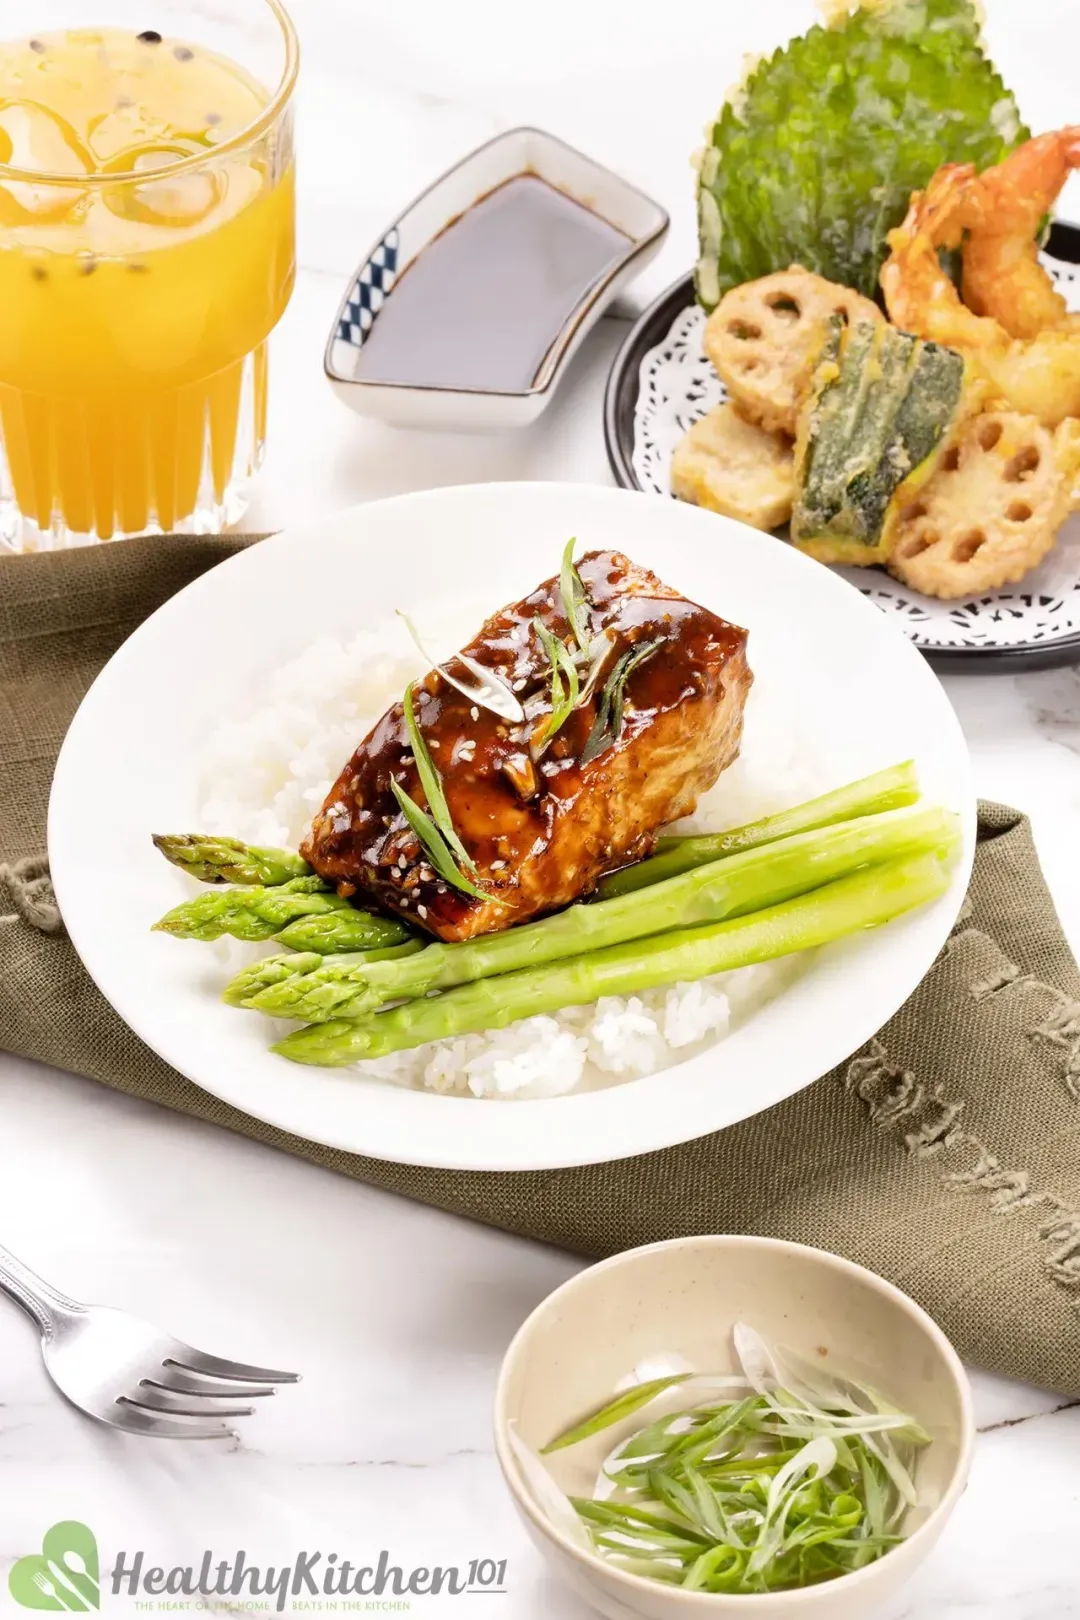 A serving plate of a baked teriyaki salmon filet placed on cooked white rice and asparagus; on the side are a fork, a smaller plate of tempura, a cup of passion fruit juice, two small bowls of teriyaki sauce and chopped scallion.